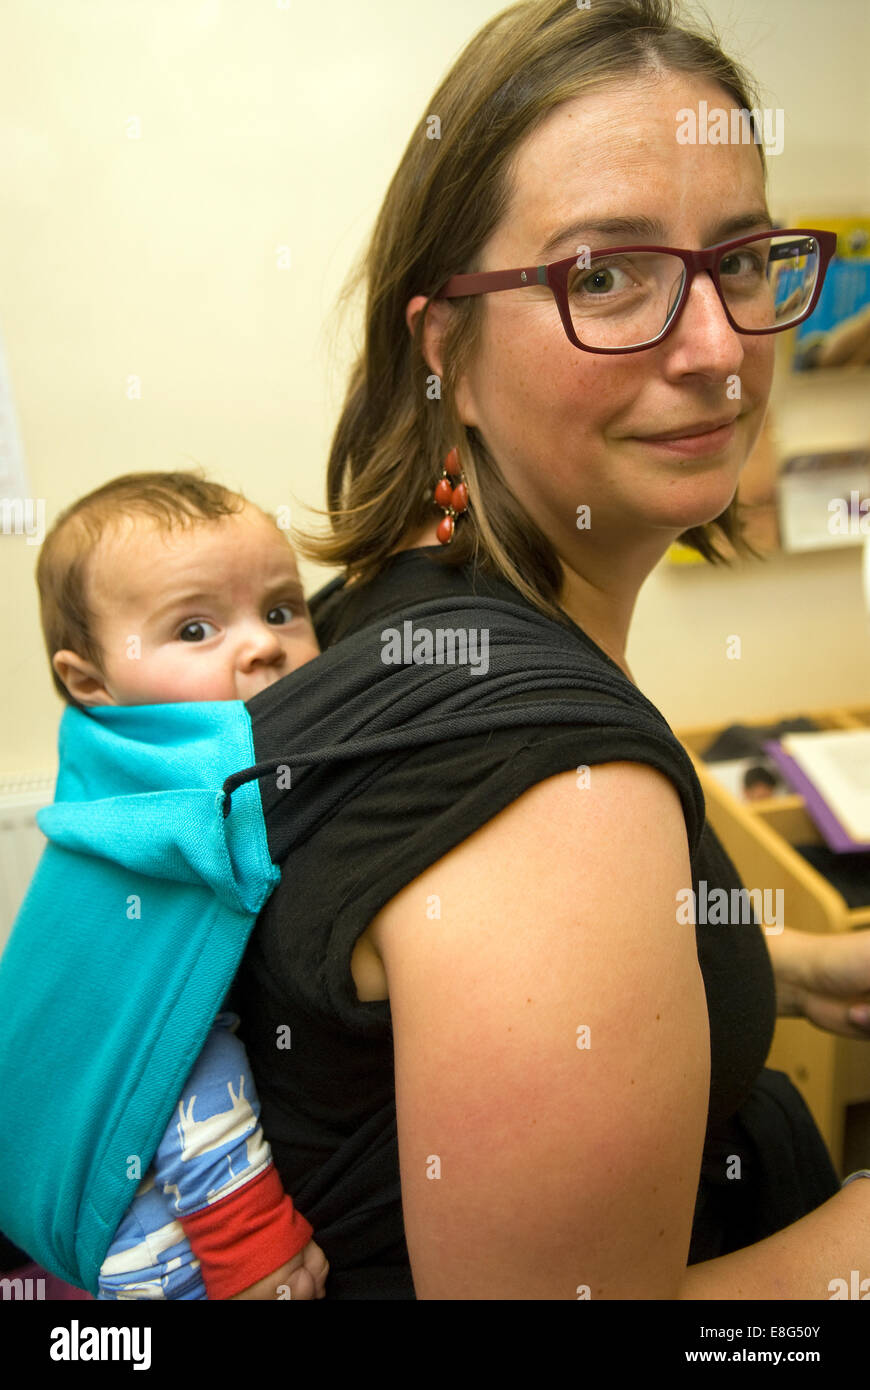 Young mother carrying her 3 month old son in a baby sling, Farnham, Surrey, UK. Stock Photo